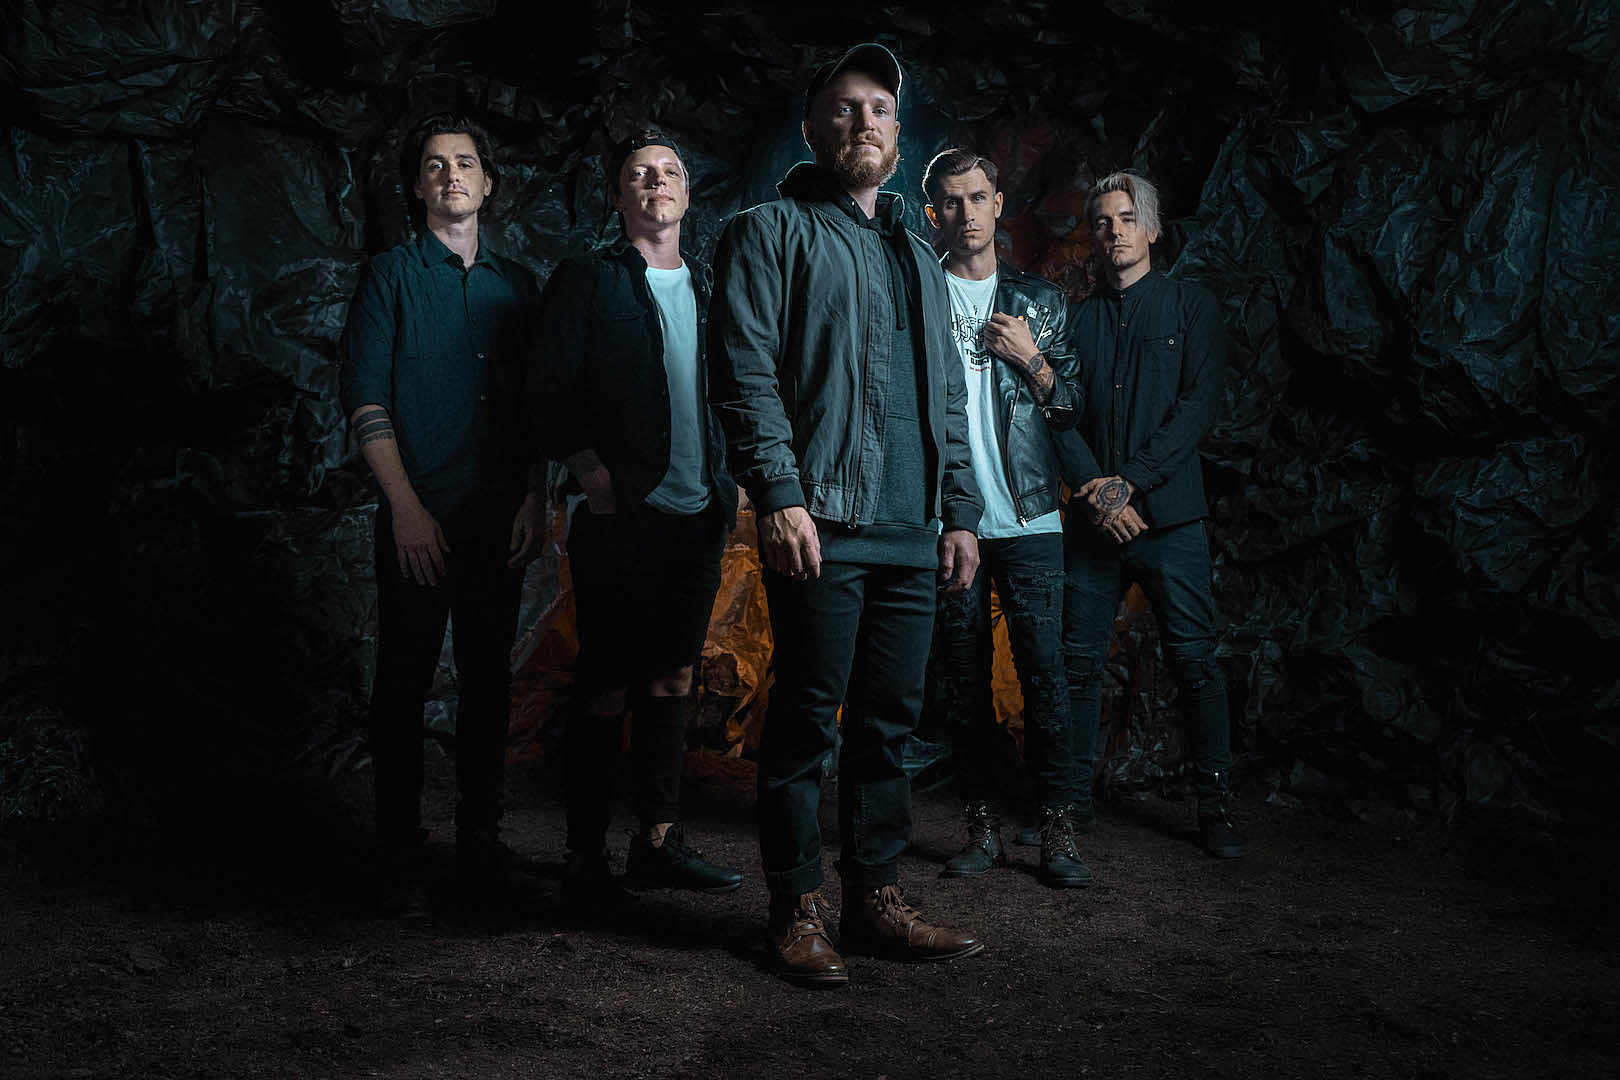 We Came As Romans Challenge You to 'Die or Grow' on New Song